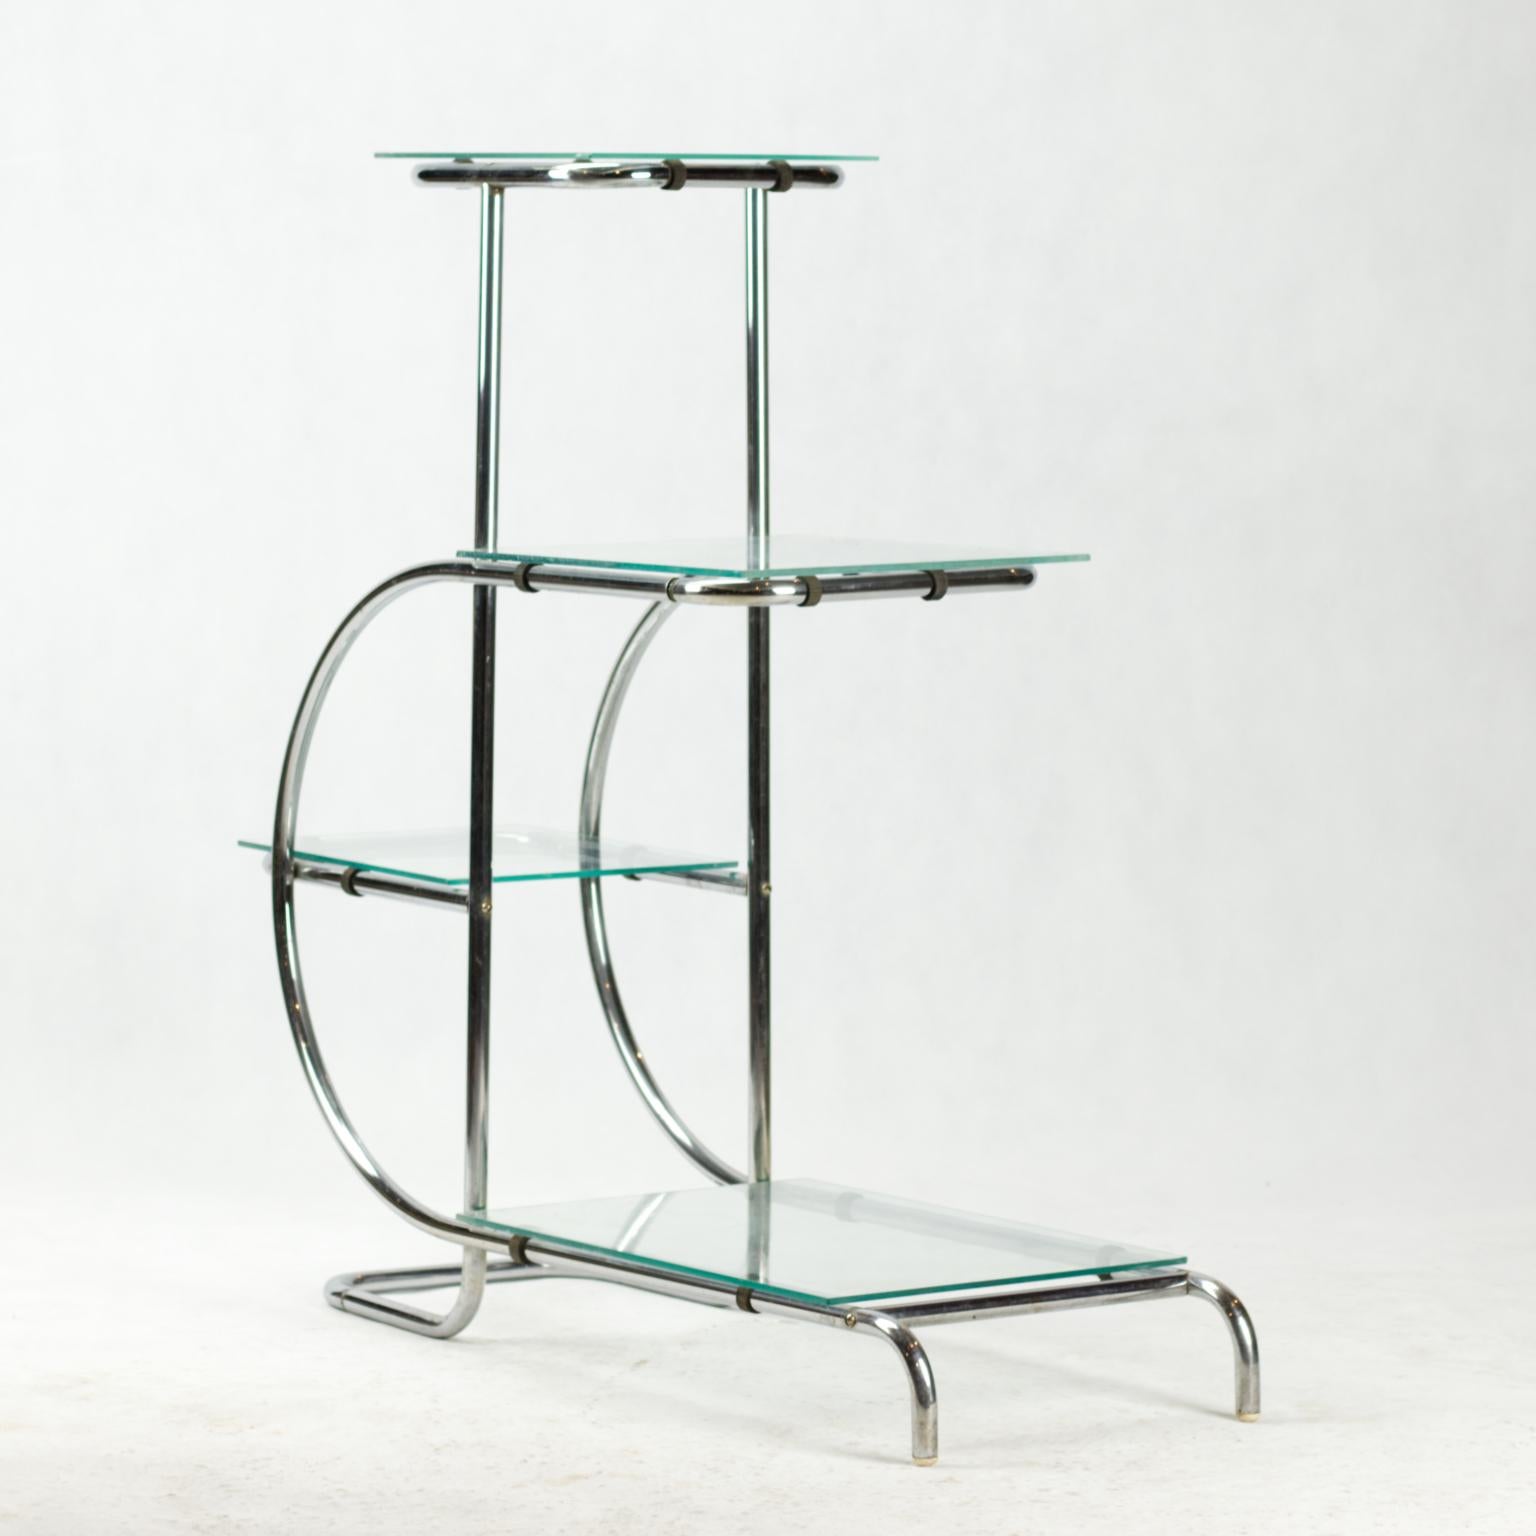 Chrome-plated tubular steel étagère designed by Emile Guyot and made in the 1930s with glass shelves. Chrome plating is in original condition.